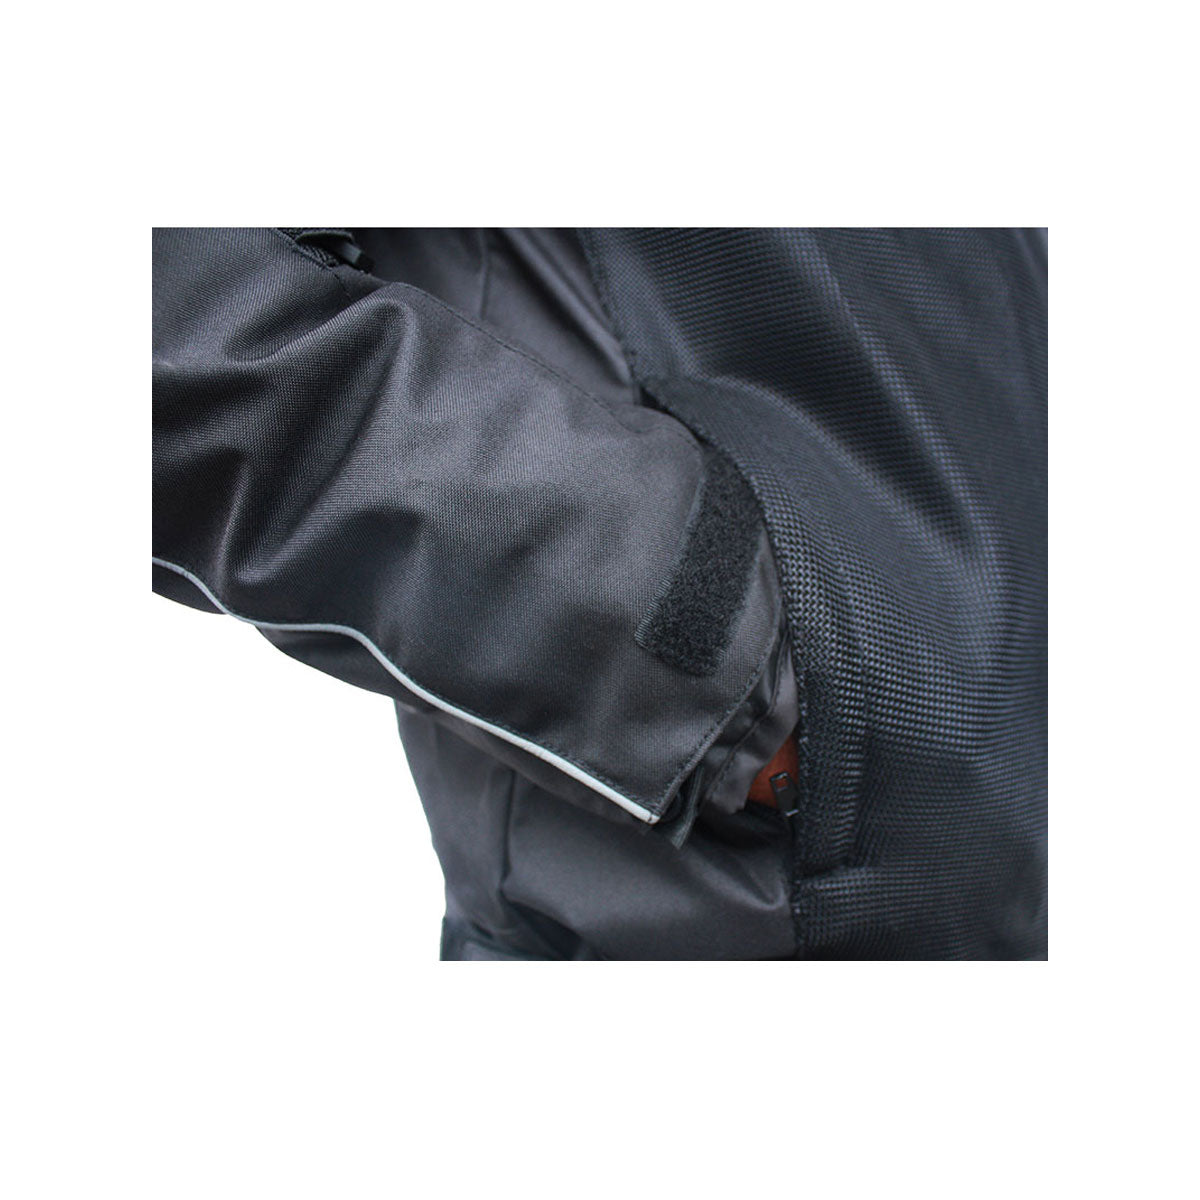 Winter Waterproof Motorcycle Jacket For Men Cold Proof, Ideal For Motorbike  Riding With Removable Linner Motorcycle Apparel From Kaolaya, $81.77 |  DHgate.Com